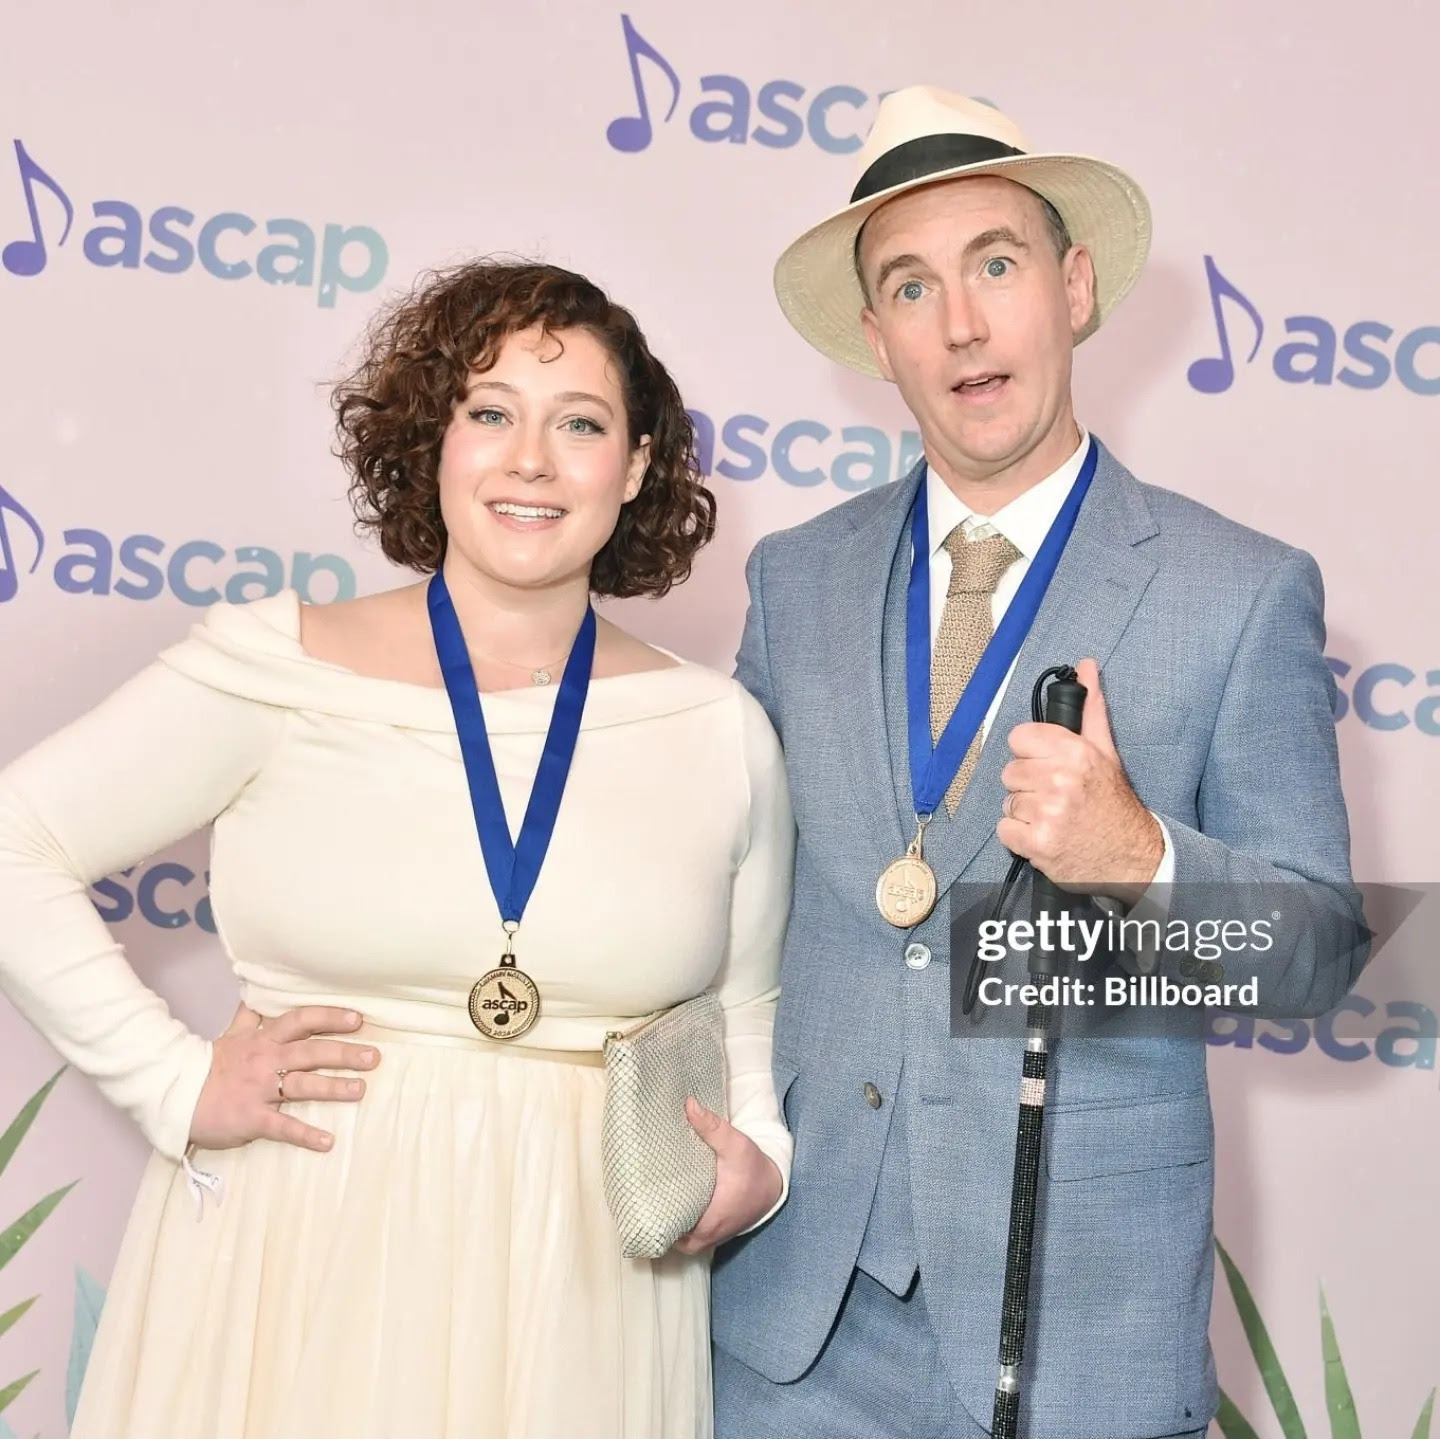 Andrew berkan and his wife at ascap aprty